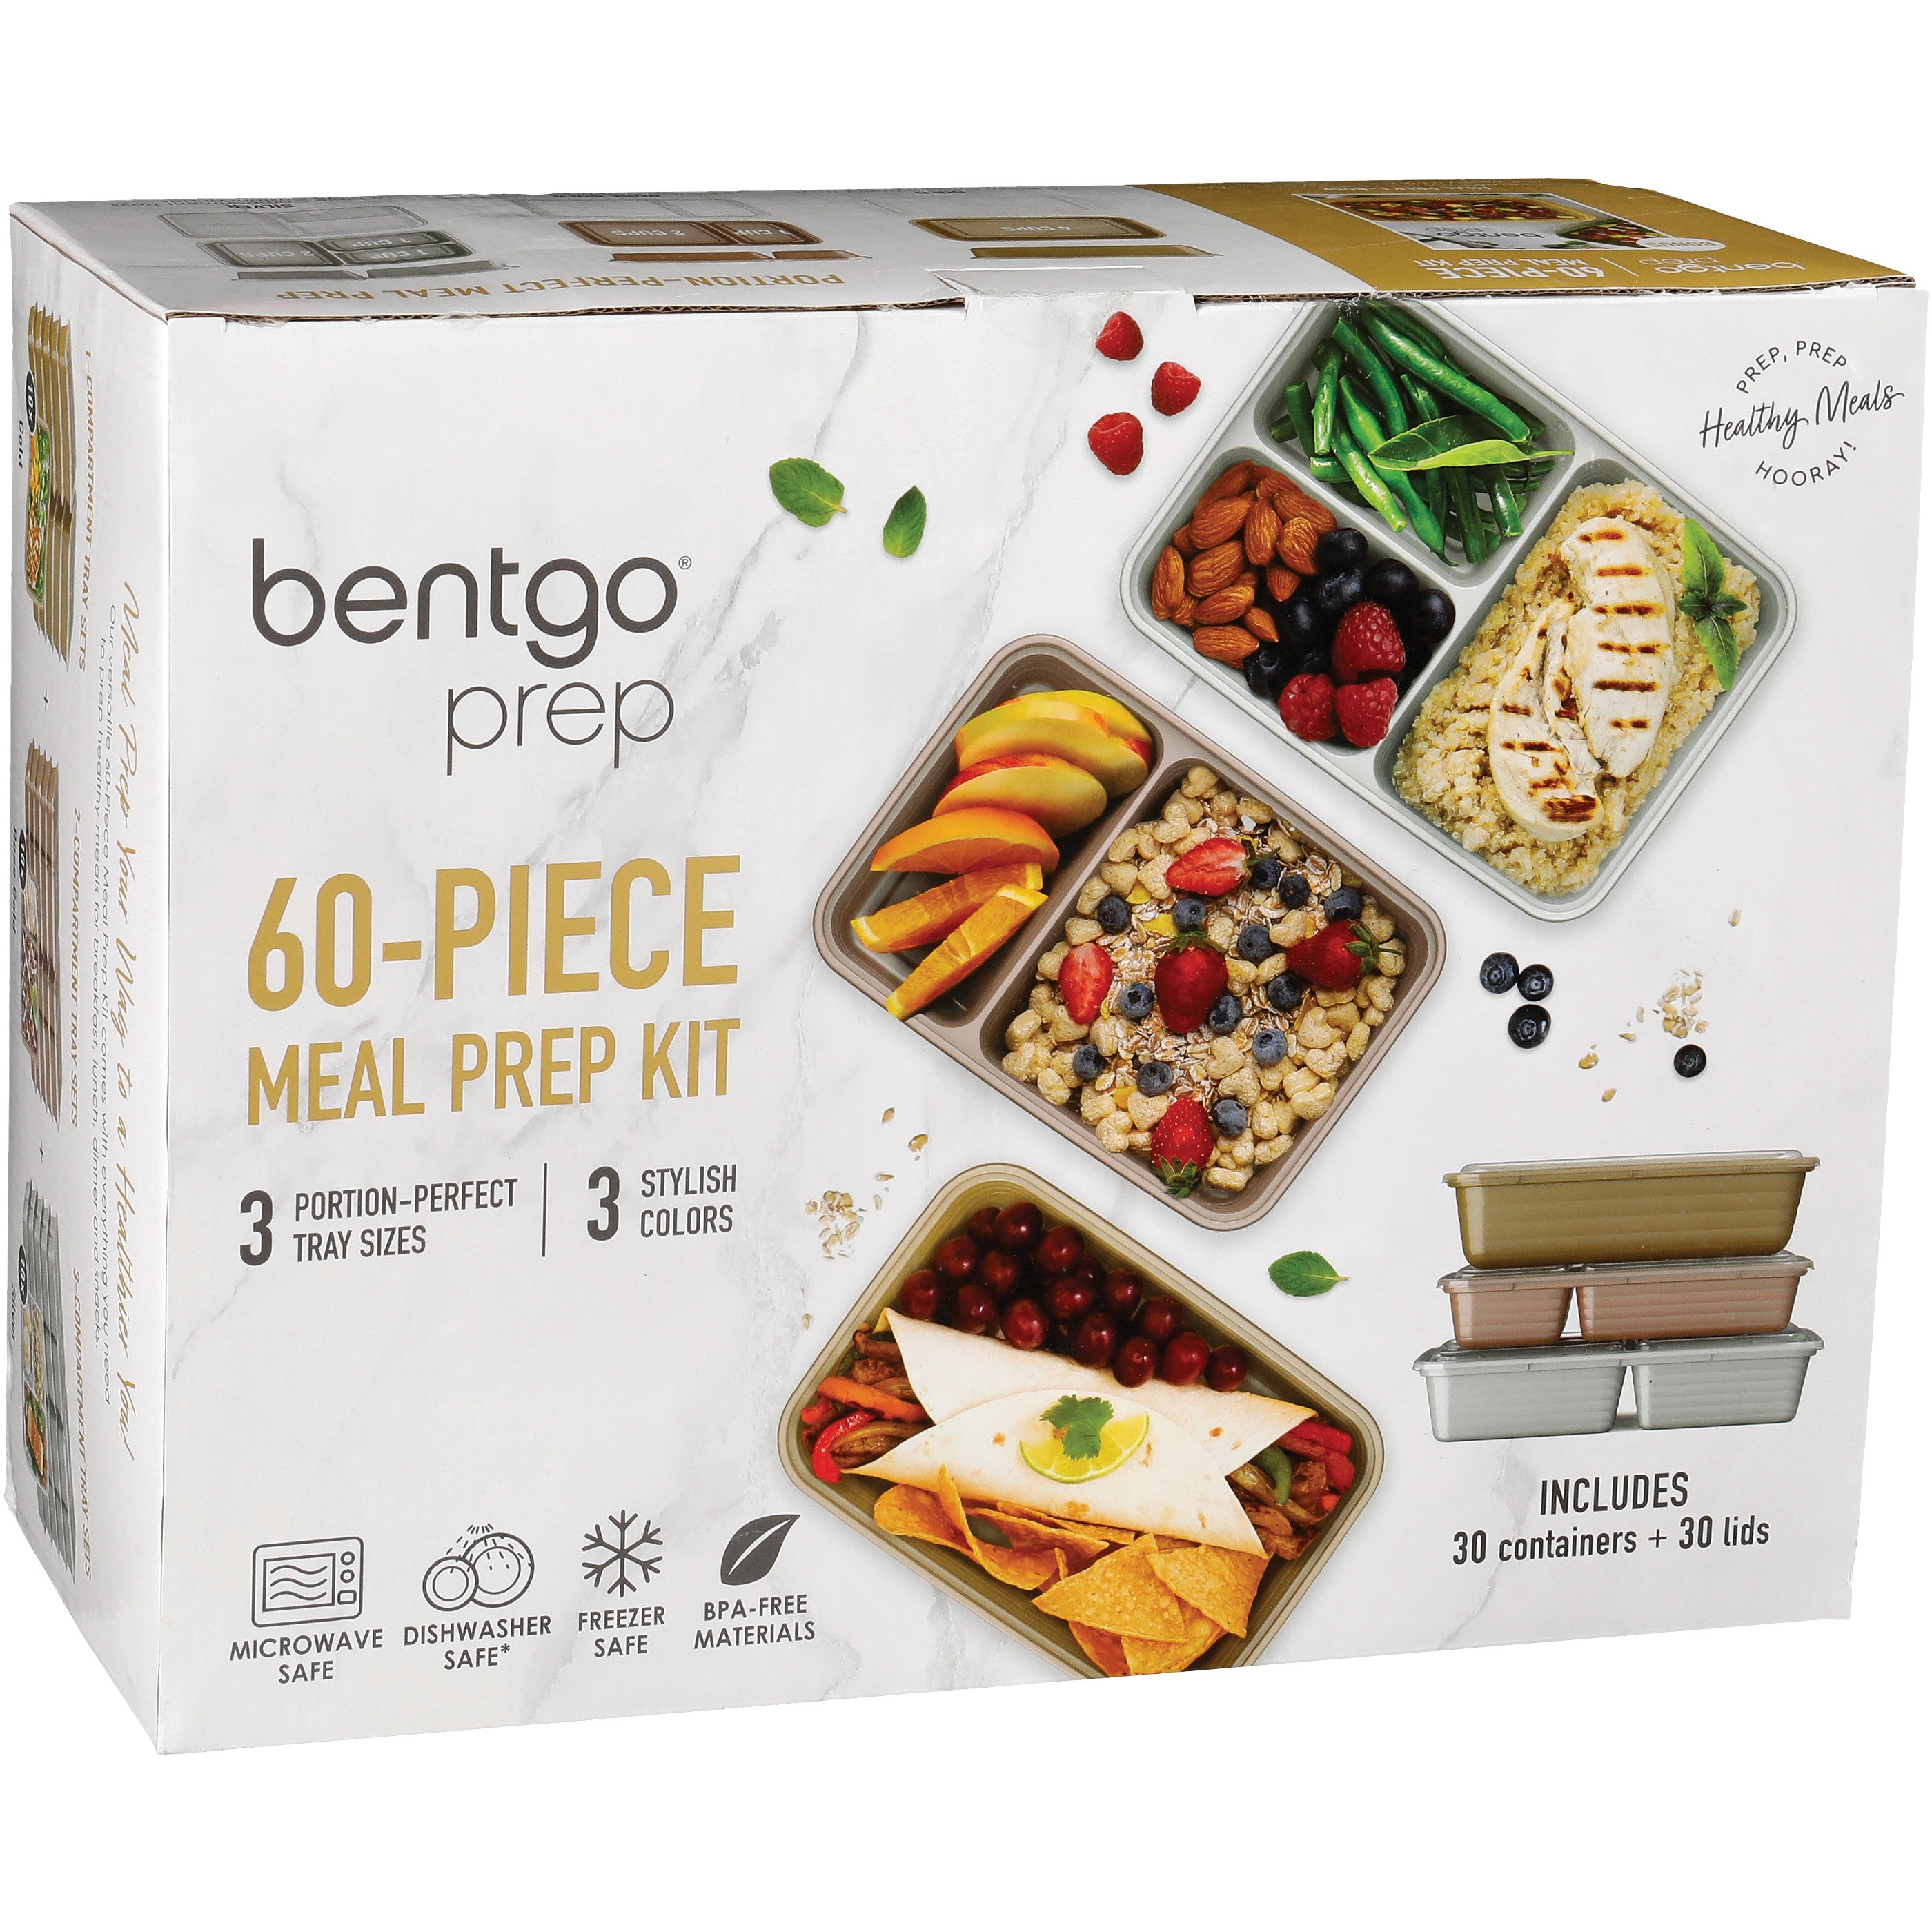 2) BENTGO MEAL PREP KITS IN BOXES & MULTIMEAL BAG - Earl's Auction